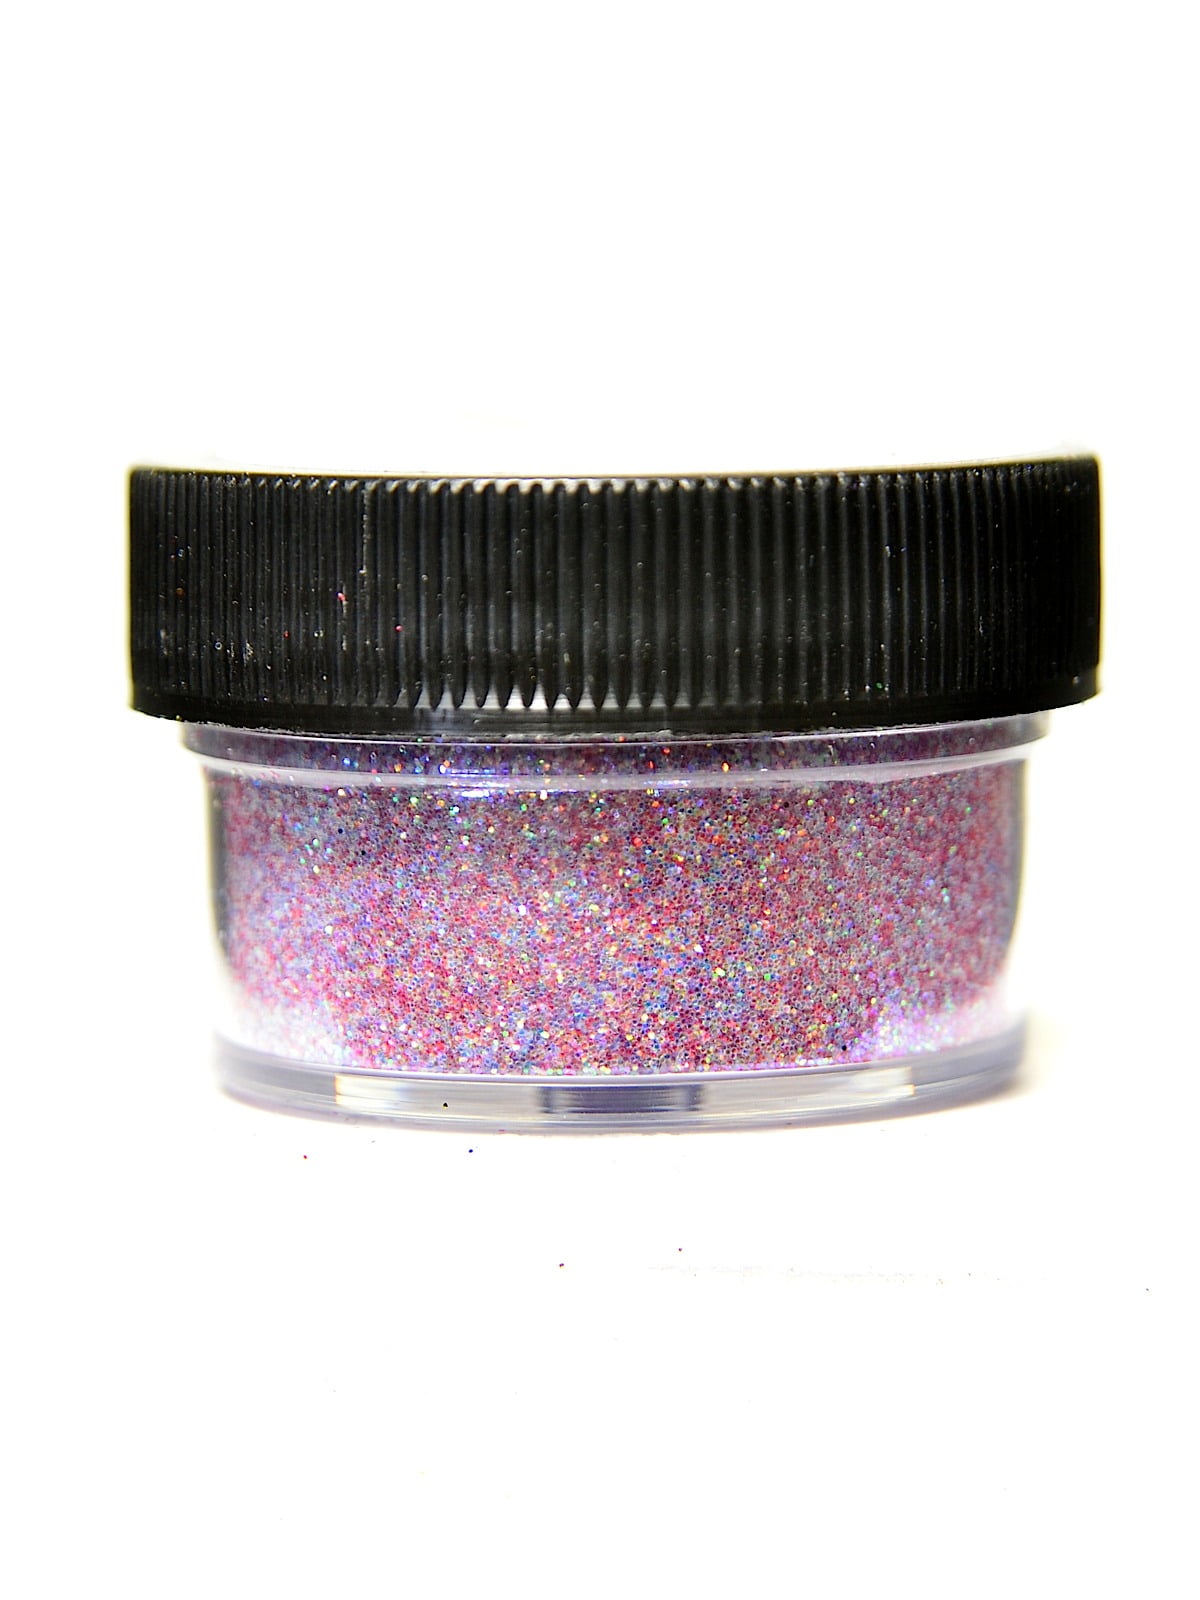 Sulyn Extra Fine Glitter for Crafts, Light Cameo Pink, 2.5 oz